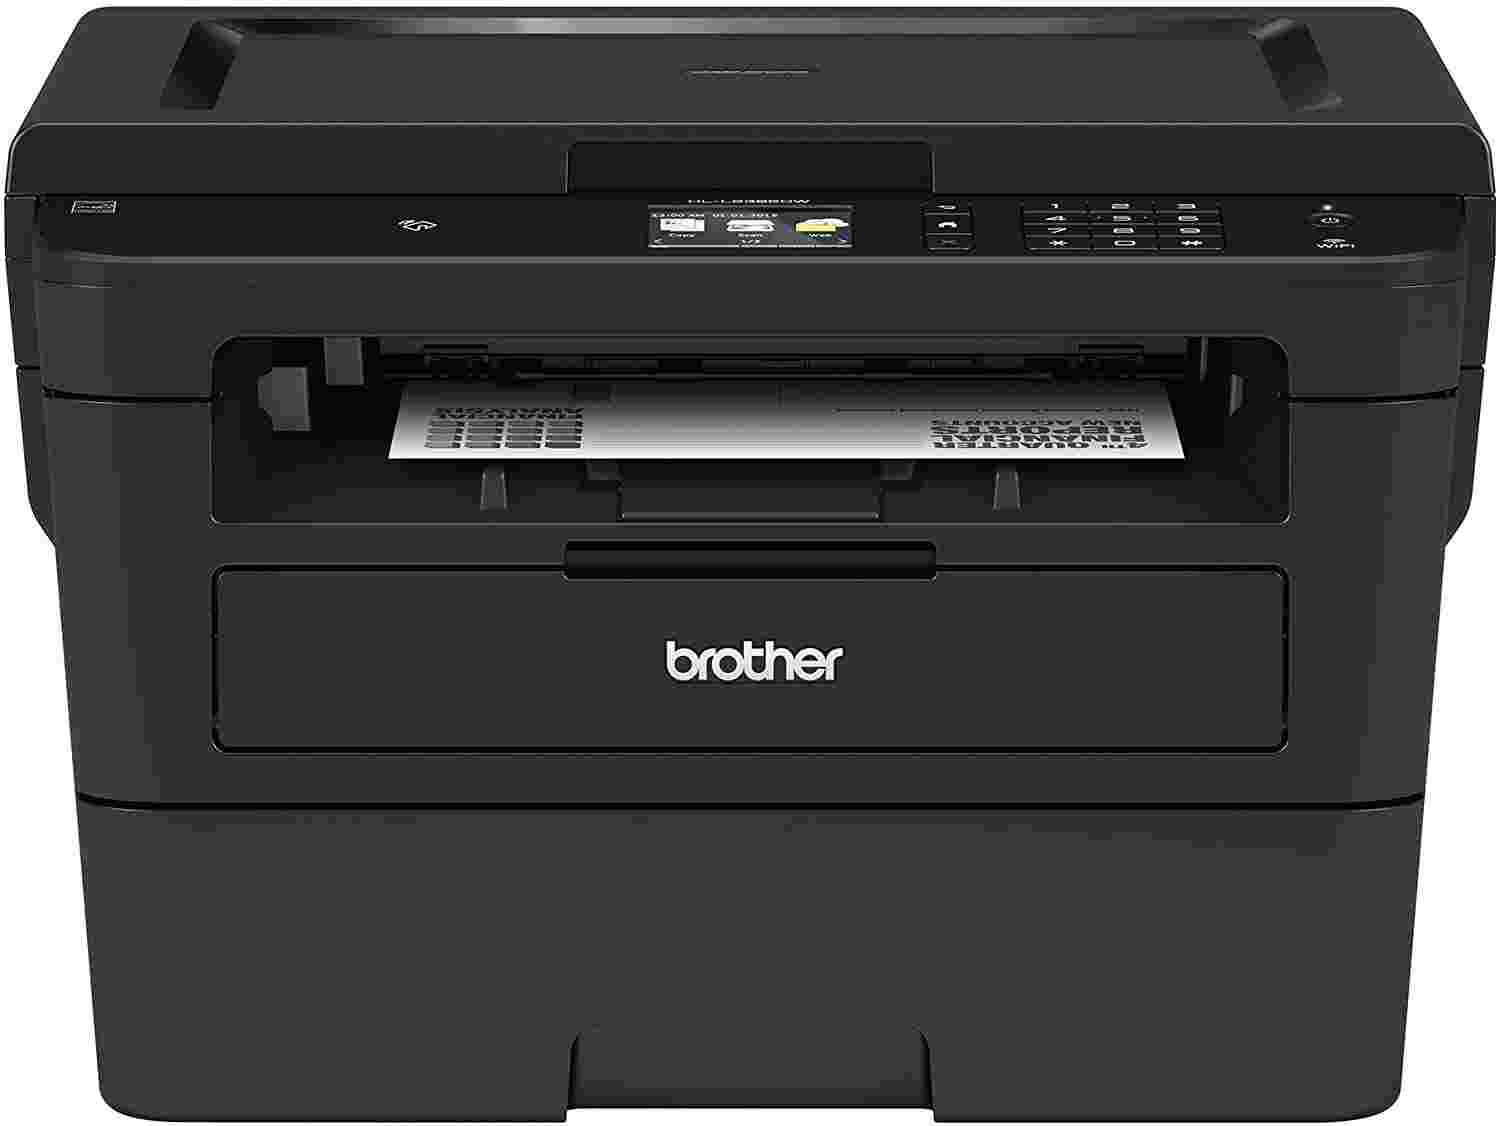 brother printer for mac